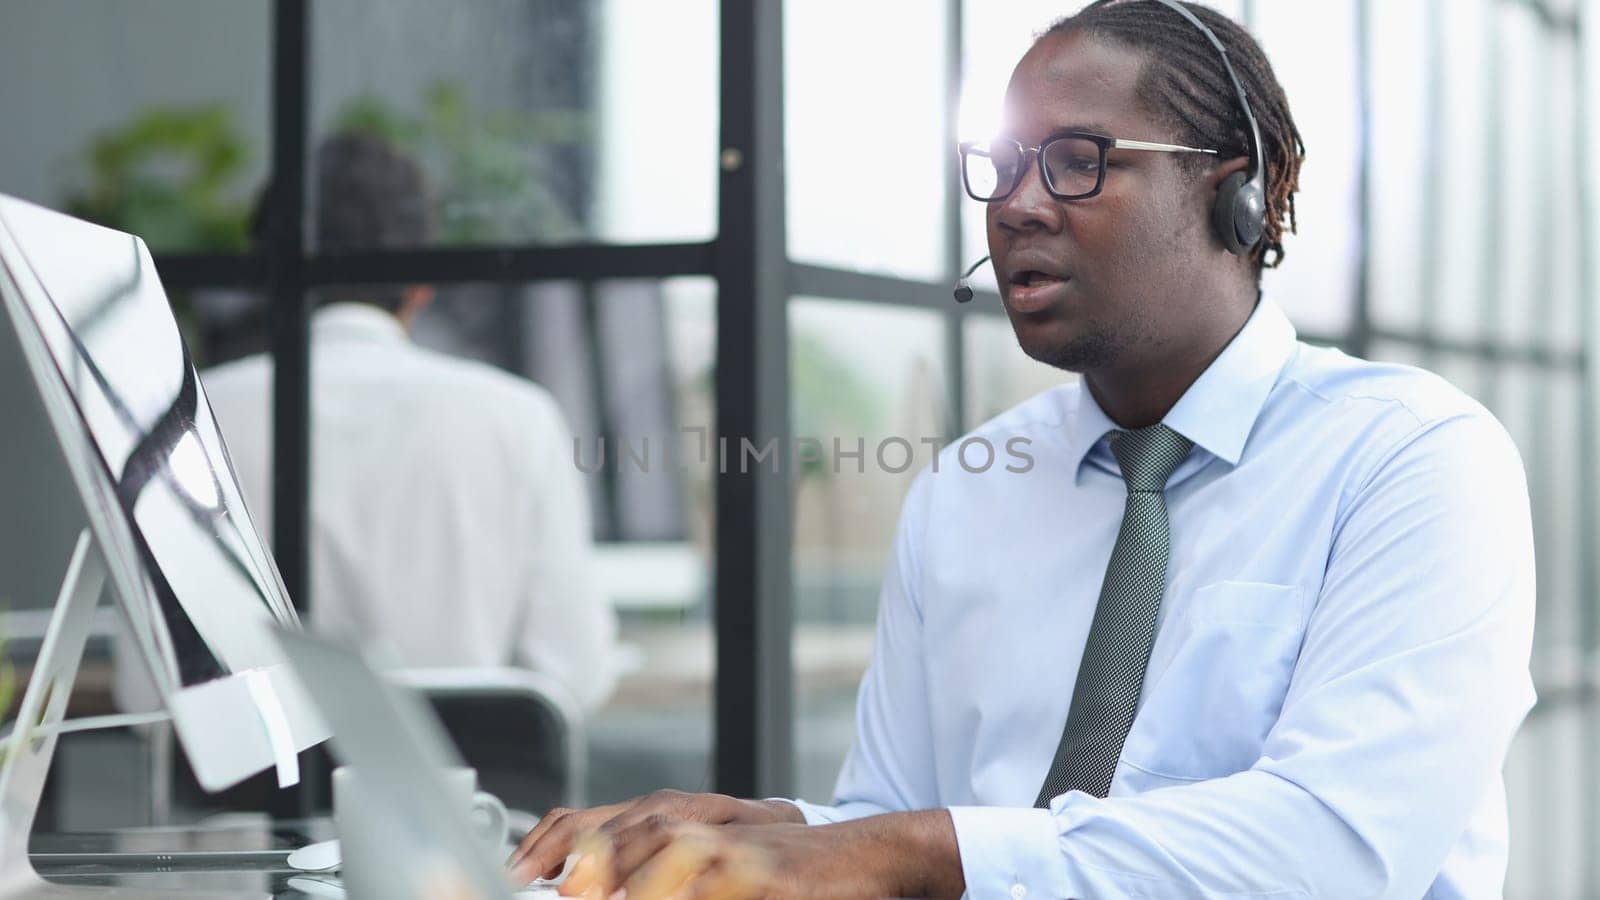 a man at a computer in a call center talking using headphones with a microphone by Prosto